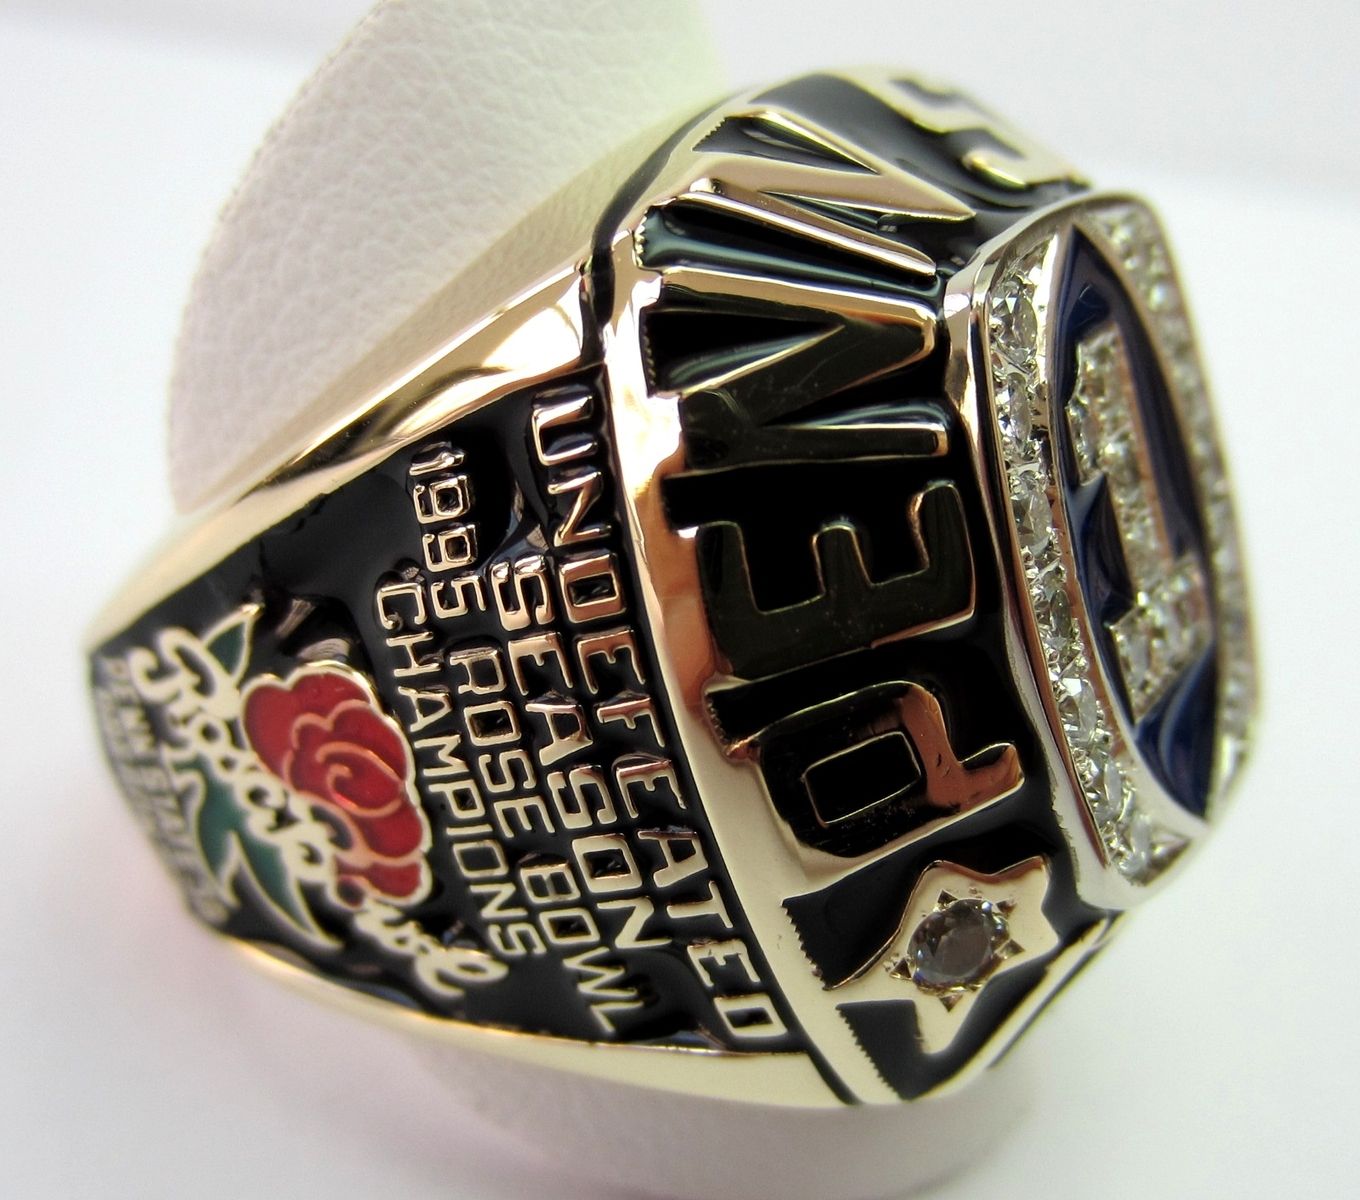 Custom Penn State Championship Ring by Limpid Jewelry Inc